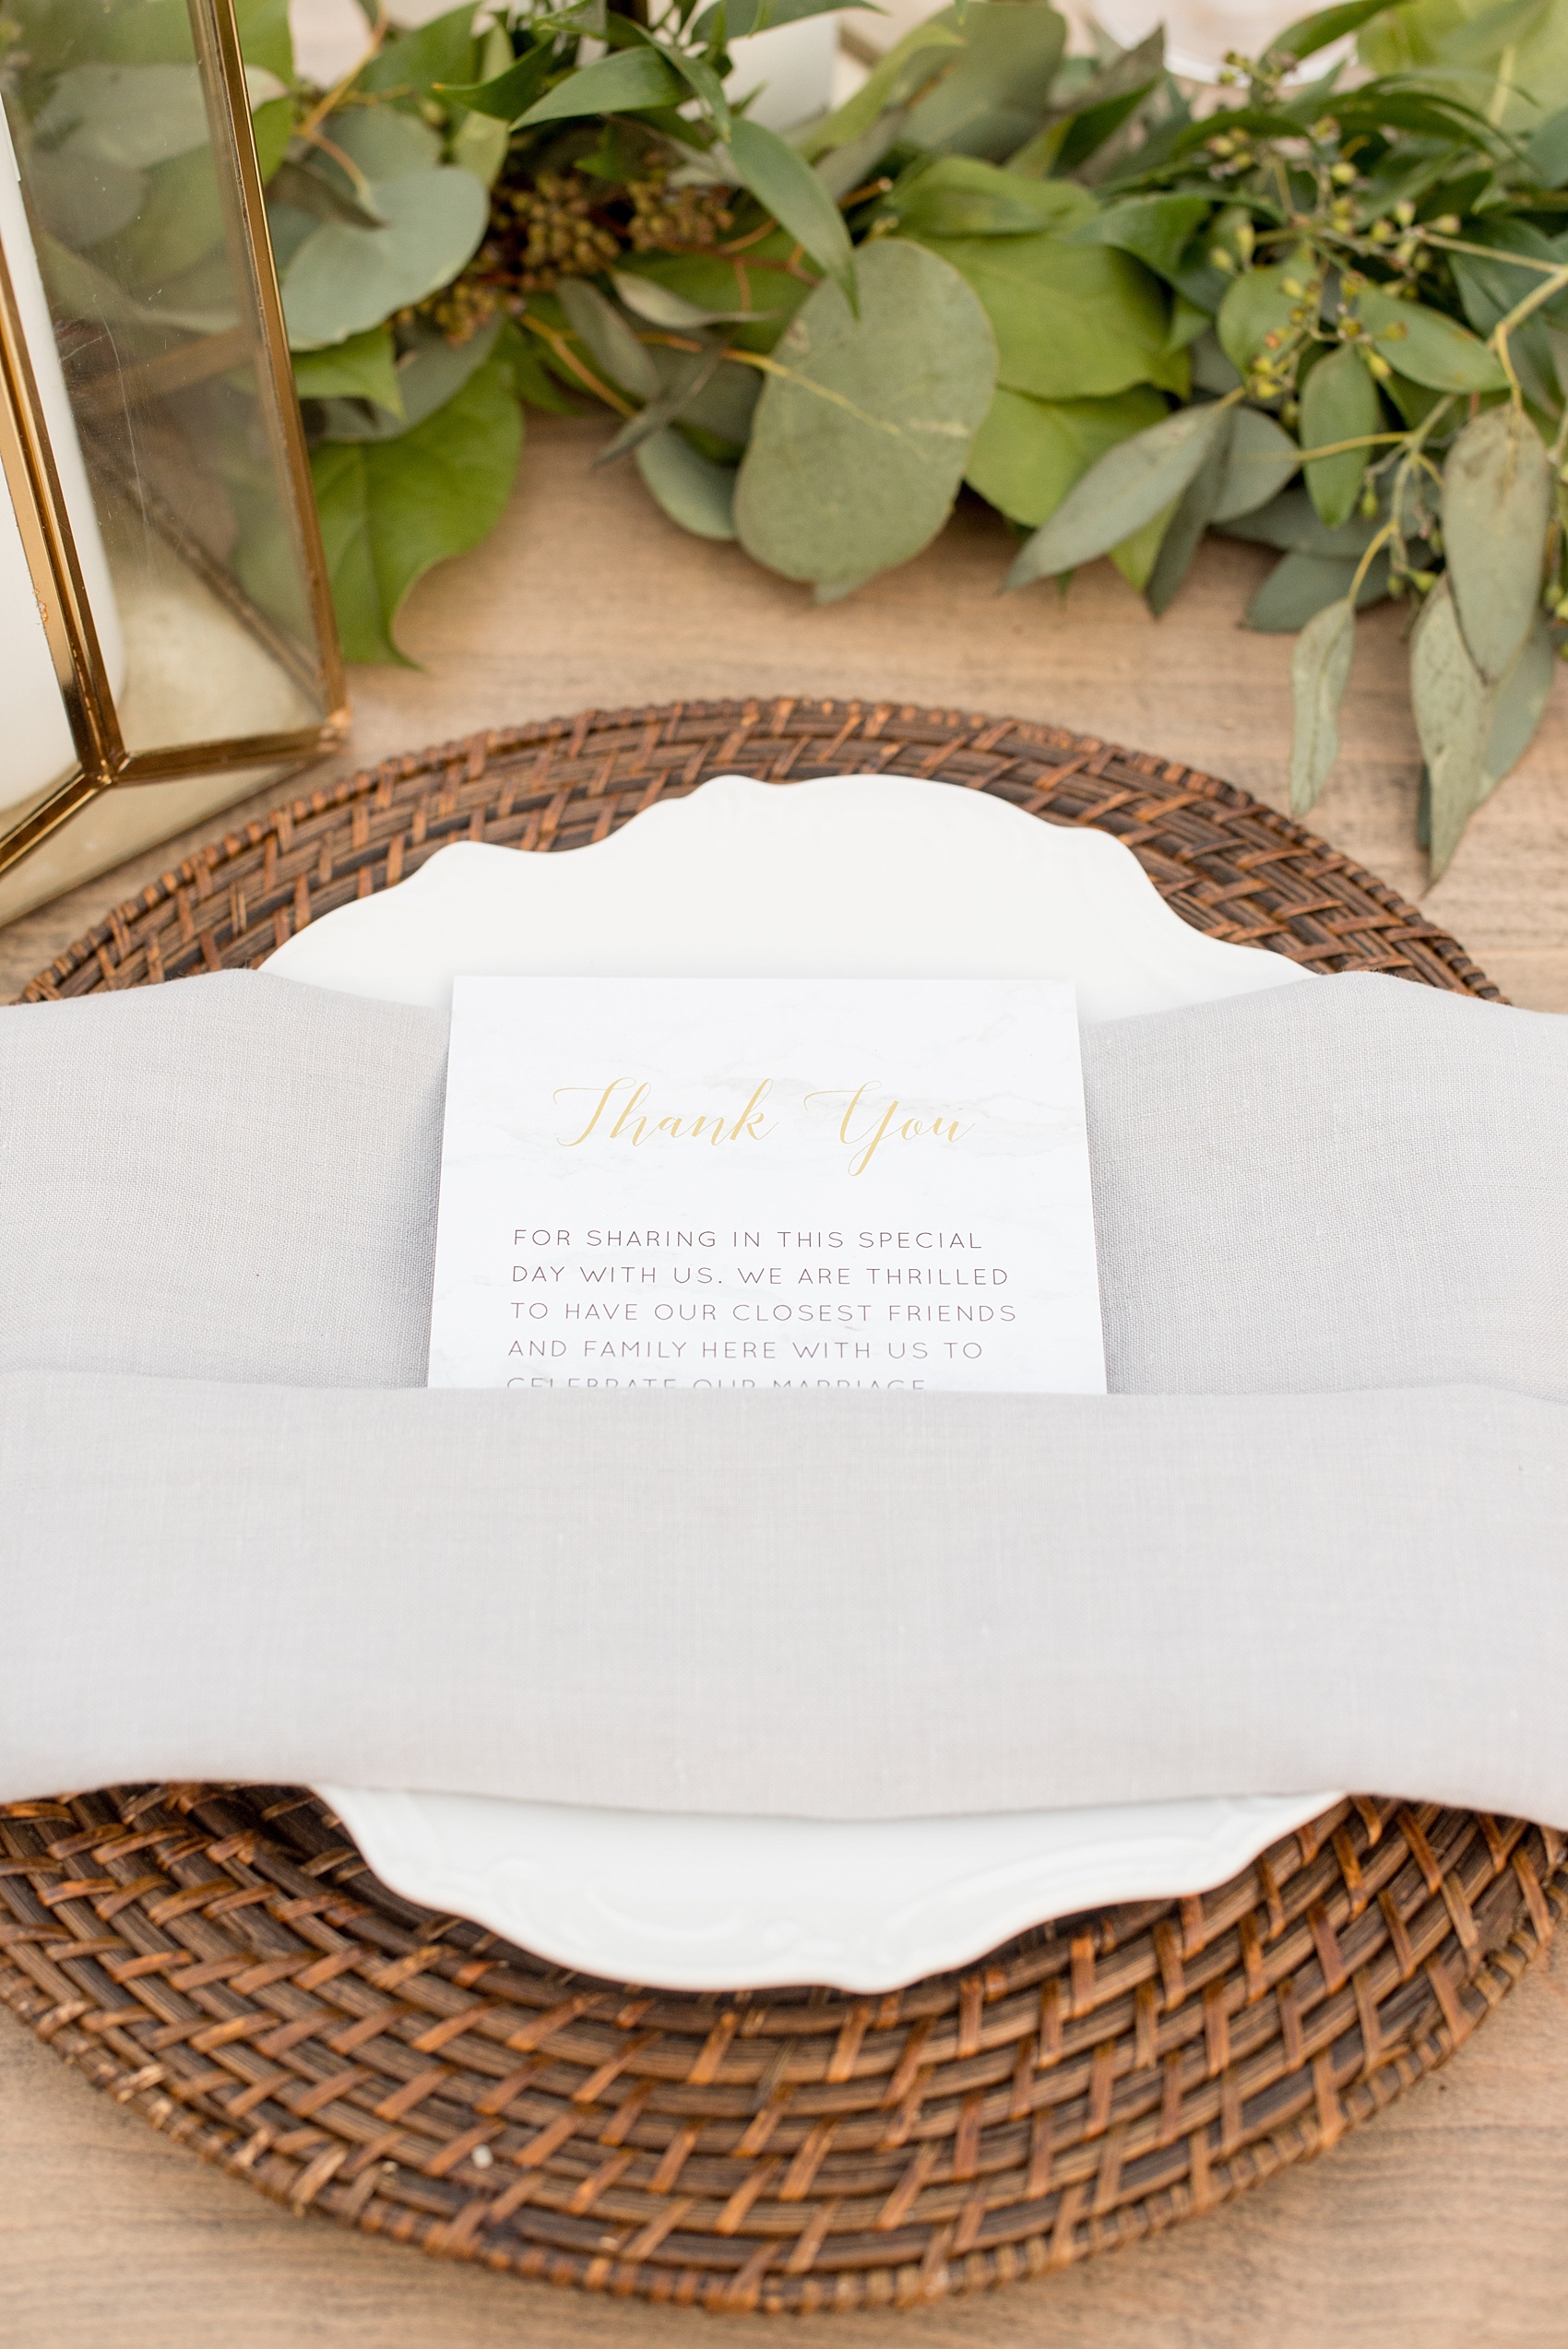 The Sutherland Wedding Photos by Mikkel Paige Photography. Grey and white farm tables by Cottage Luxe, with eucalyptus leaf garland and wooden chargers. A custom thank you note from the couple rests on top of the plates. Planning by A Southern Soiree.